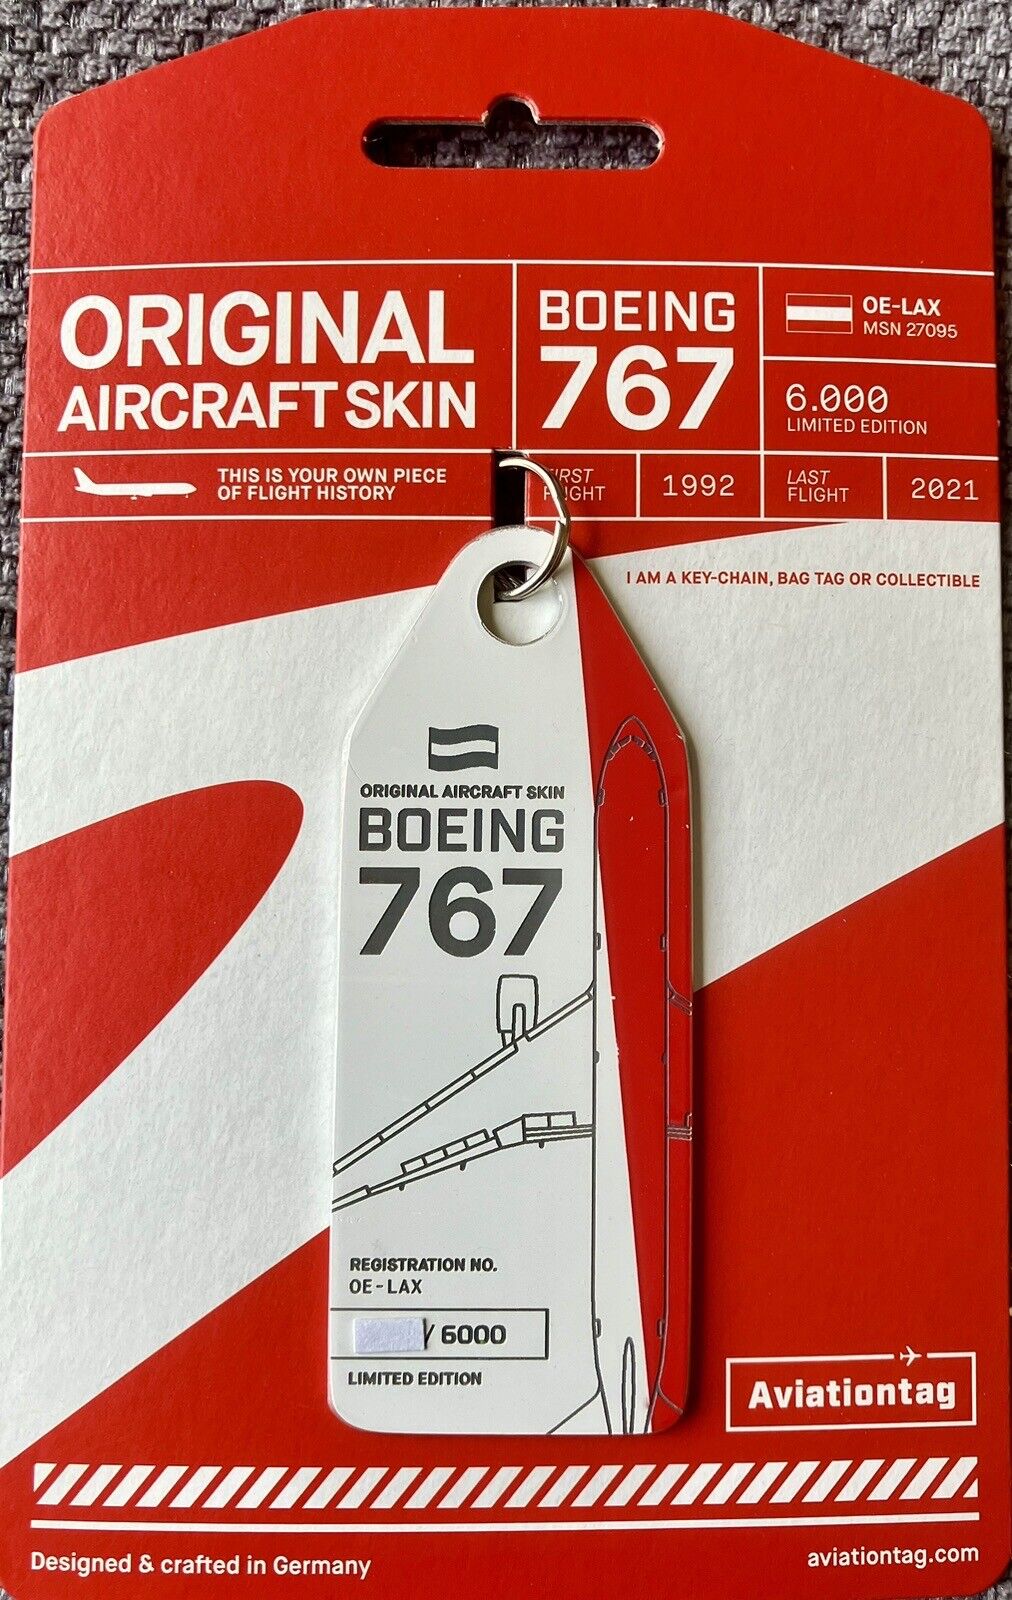 AVIATIONTAG : AUSTRIAN AIRLINES BOEING 767-300 : OE-LAX : RED & WHITE BI-COLOUR